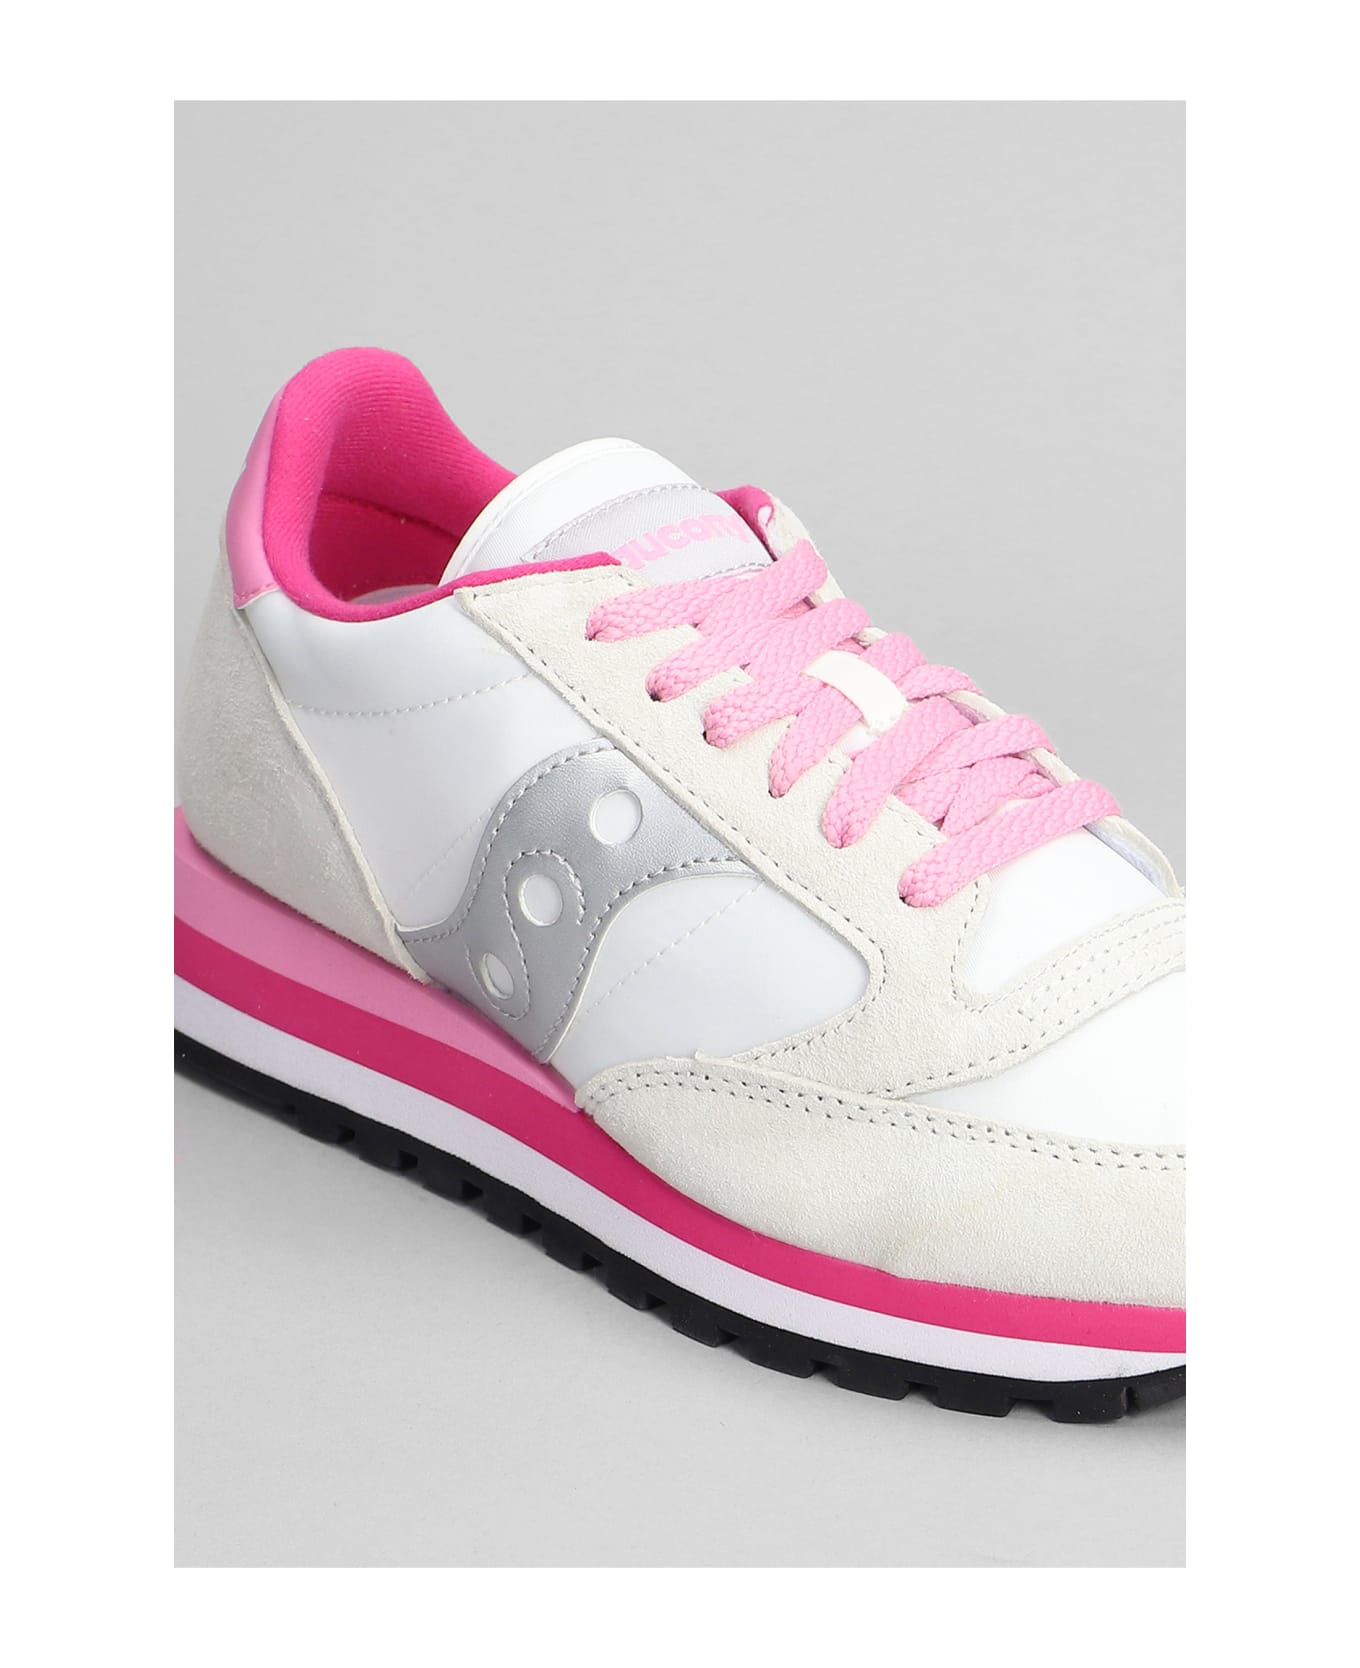 Saucony Jazz Triple Sneakers In White Suede And Fabric - White/gray/pink